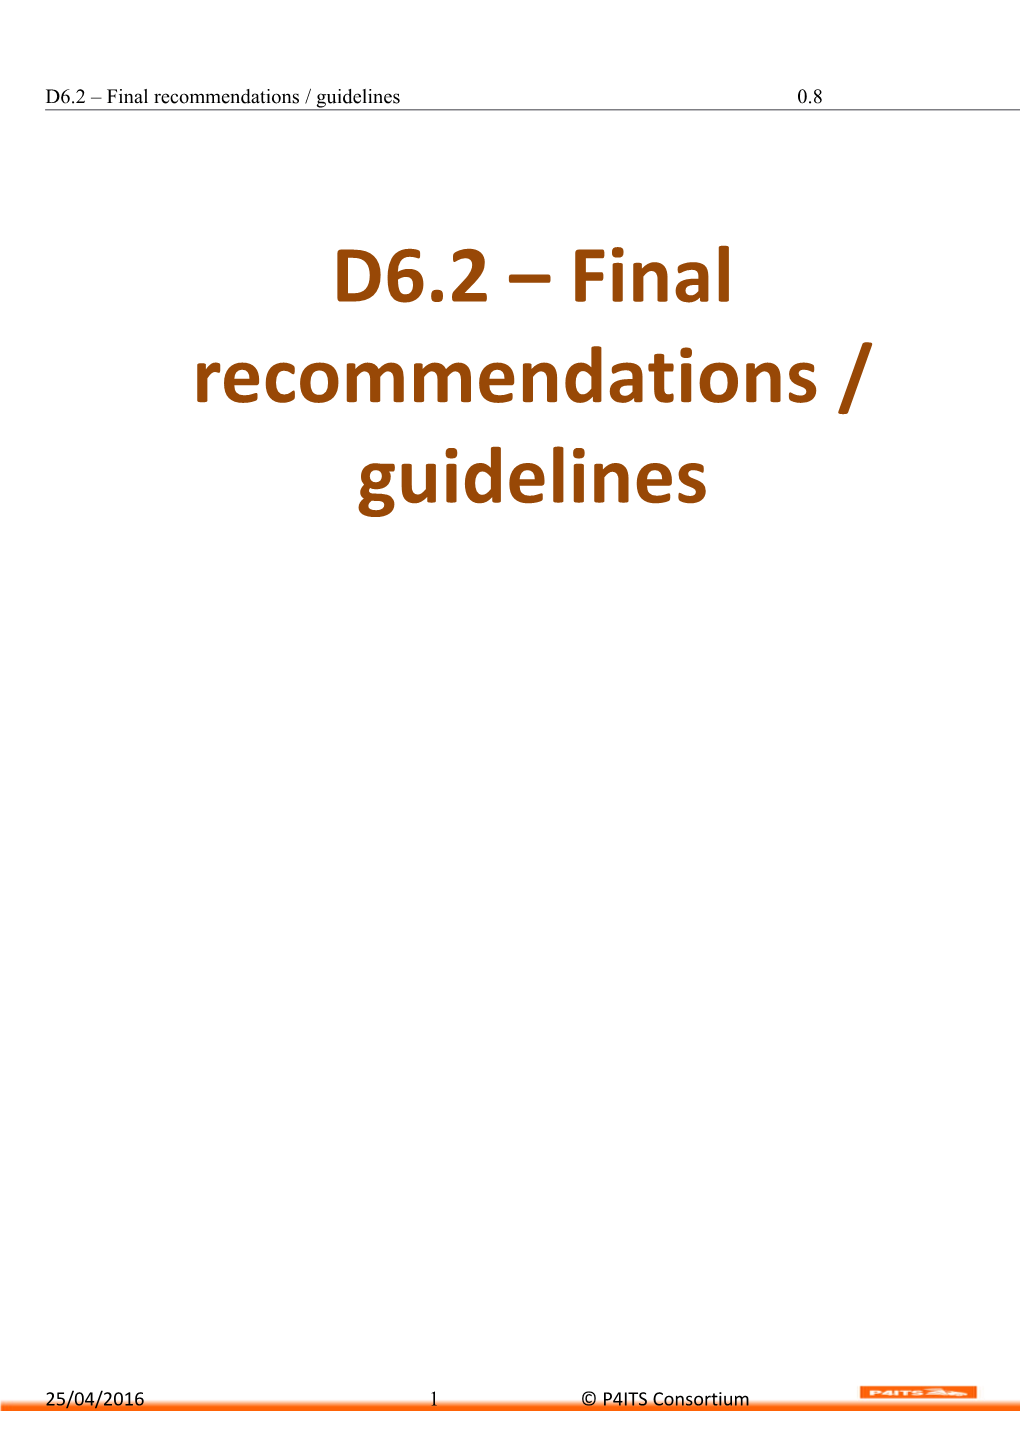 D6.2 Final Recommendations / Guidelines